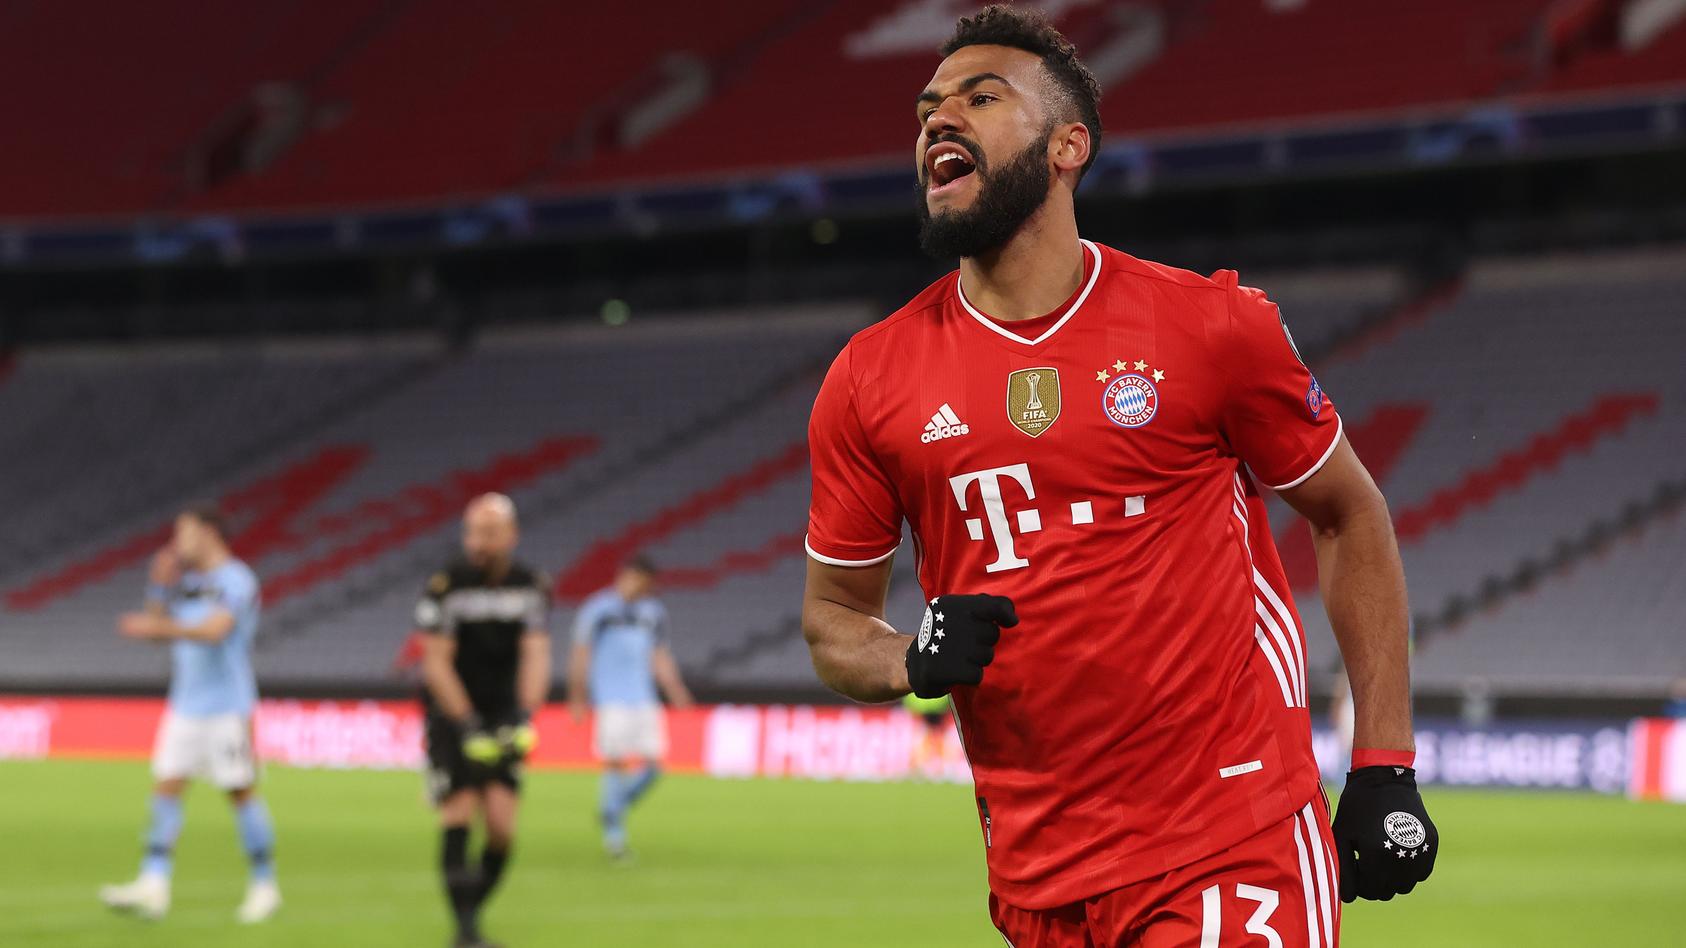 MUNICH, GERMANY - MARCH 17: Eric Maxim Choupo-Moting of FC Bayern MÃ¼nchen celebrates scoring the second team goal during the UEFA Champions League Round of 16 match between Bayern MÃ¼nchen and SS Lazio at Allianz Arena on March 17, 2021 in Munich, G